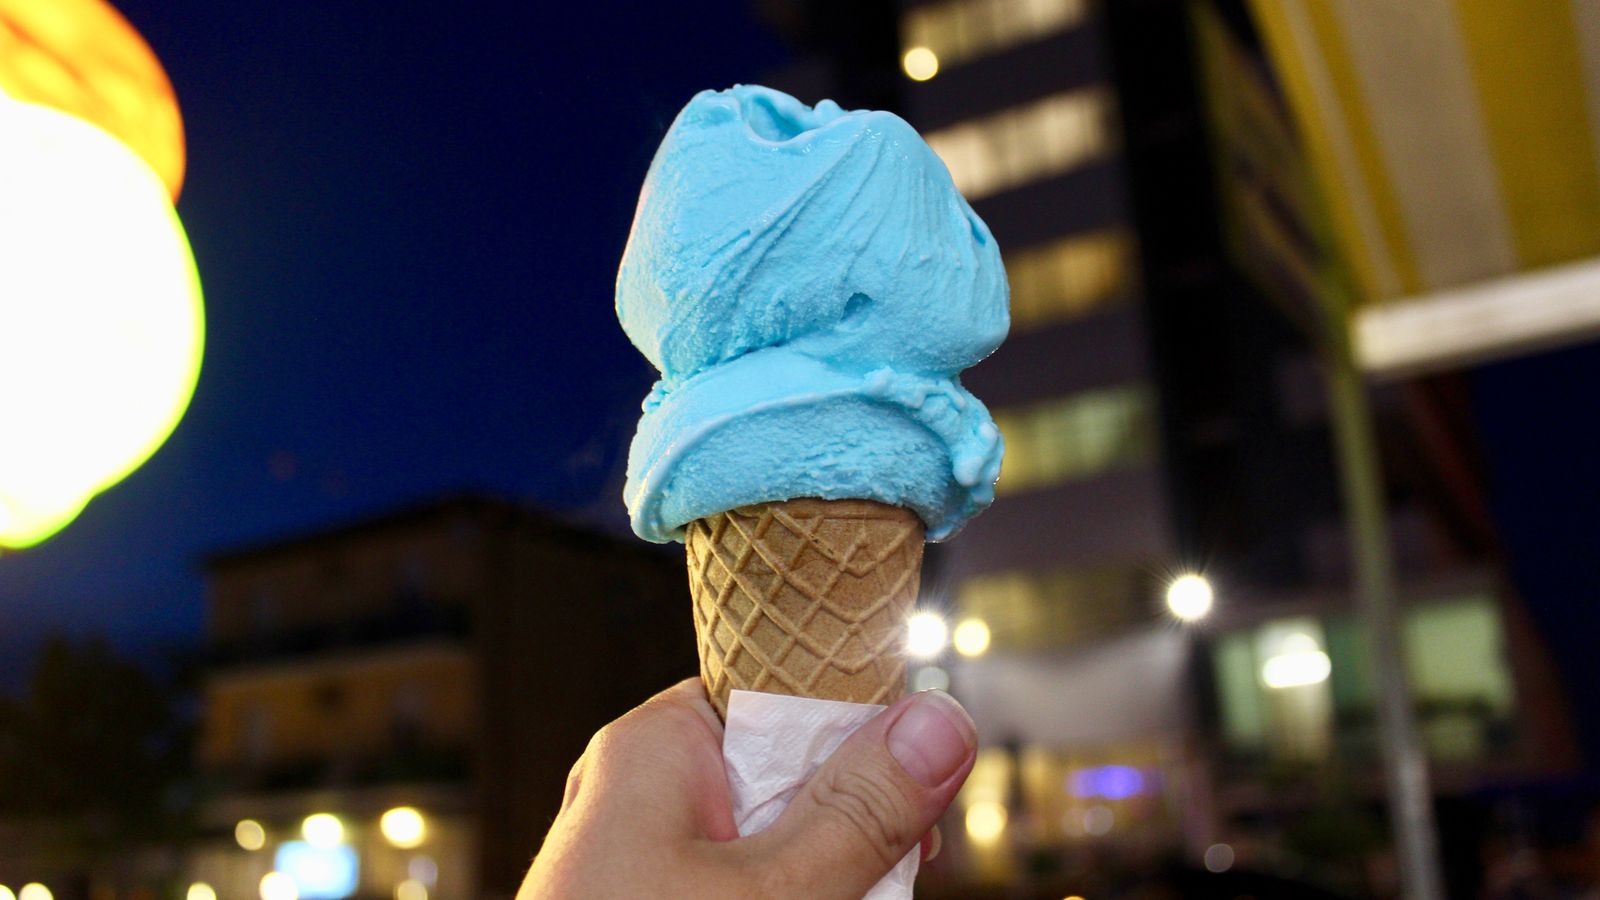 Milan backs down on plans to ban ice cream after midnight following widespread criticism